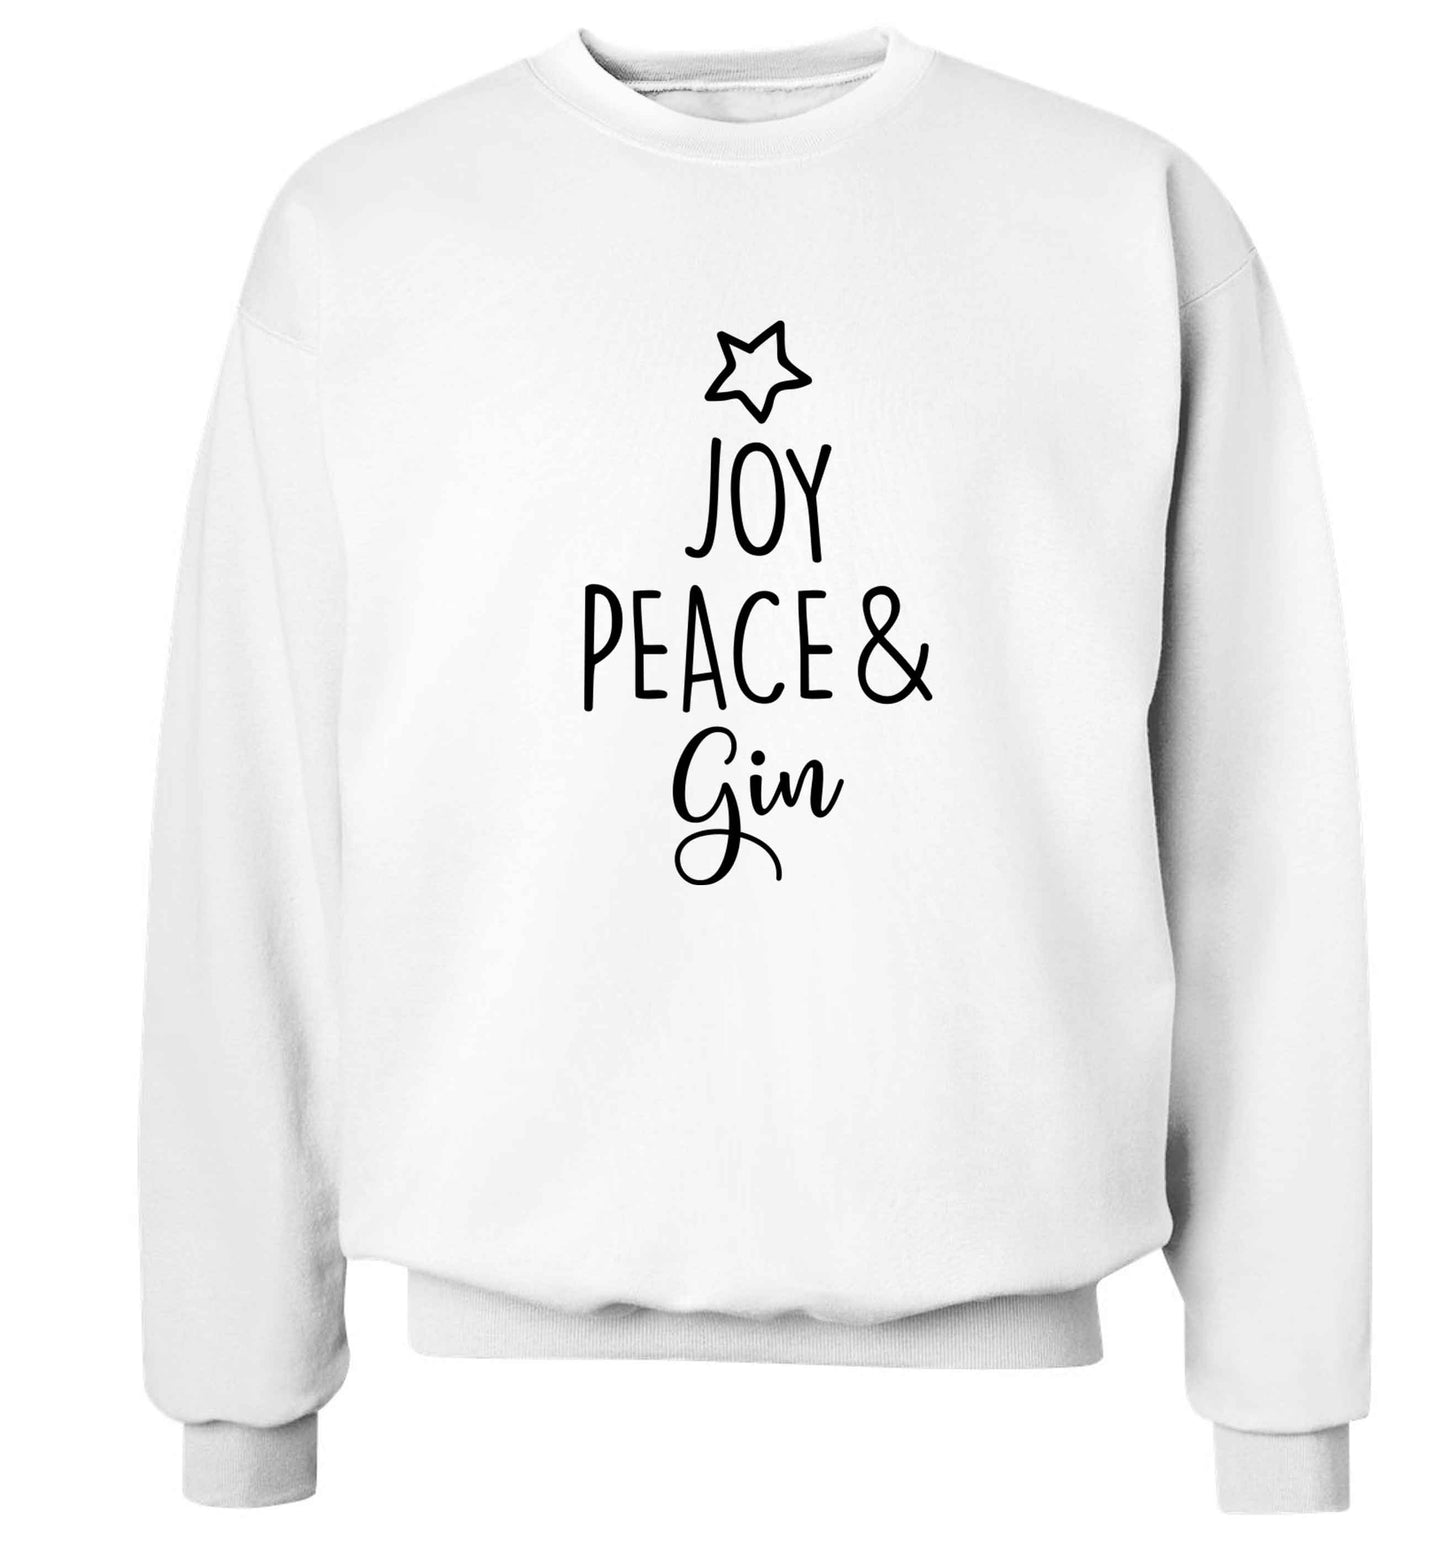 Joy peace and gin Adult's unisex white Sweater 2XL